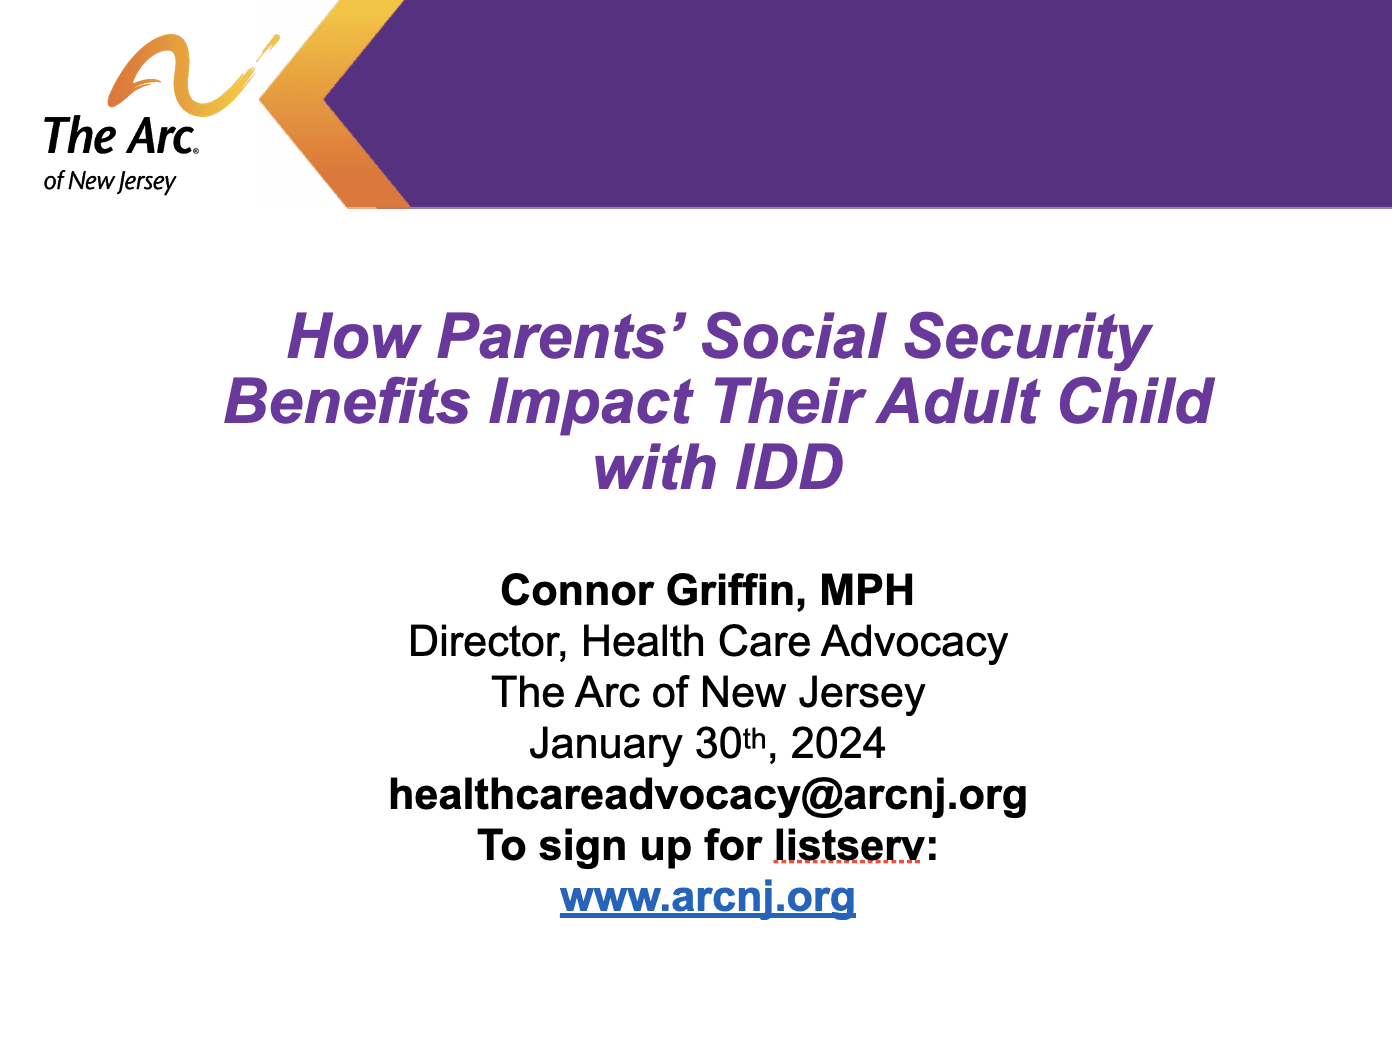 How Parents’ Social Security Benefits Impact Their Adult Child with IDD